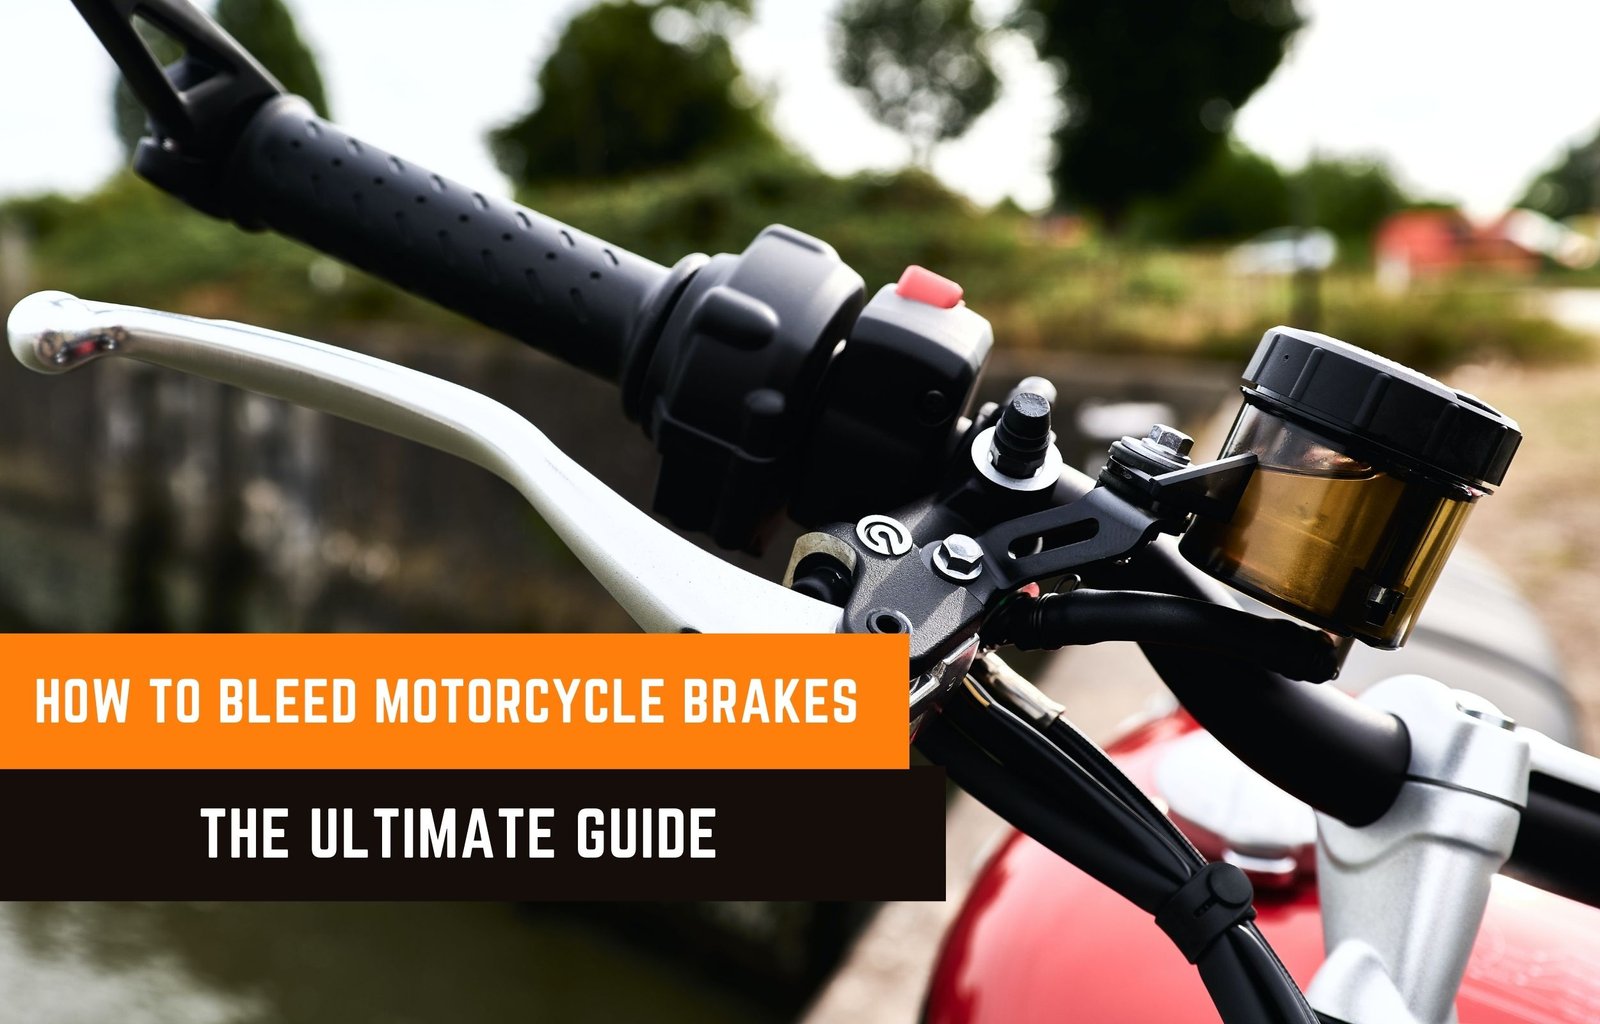 how to bleed motorcycle brakes?